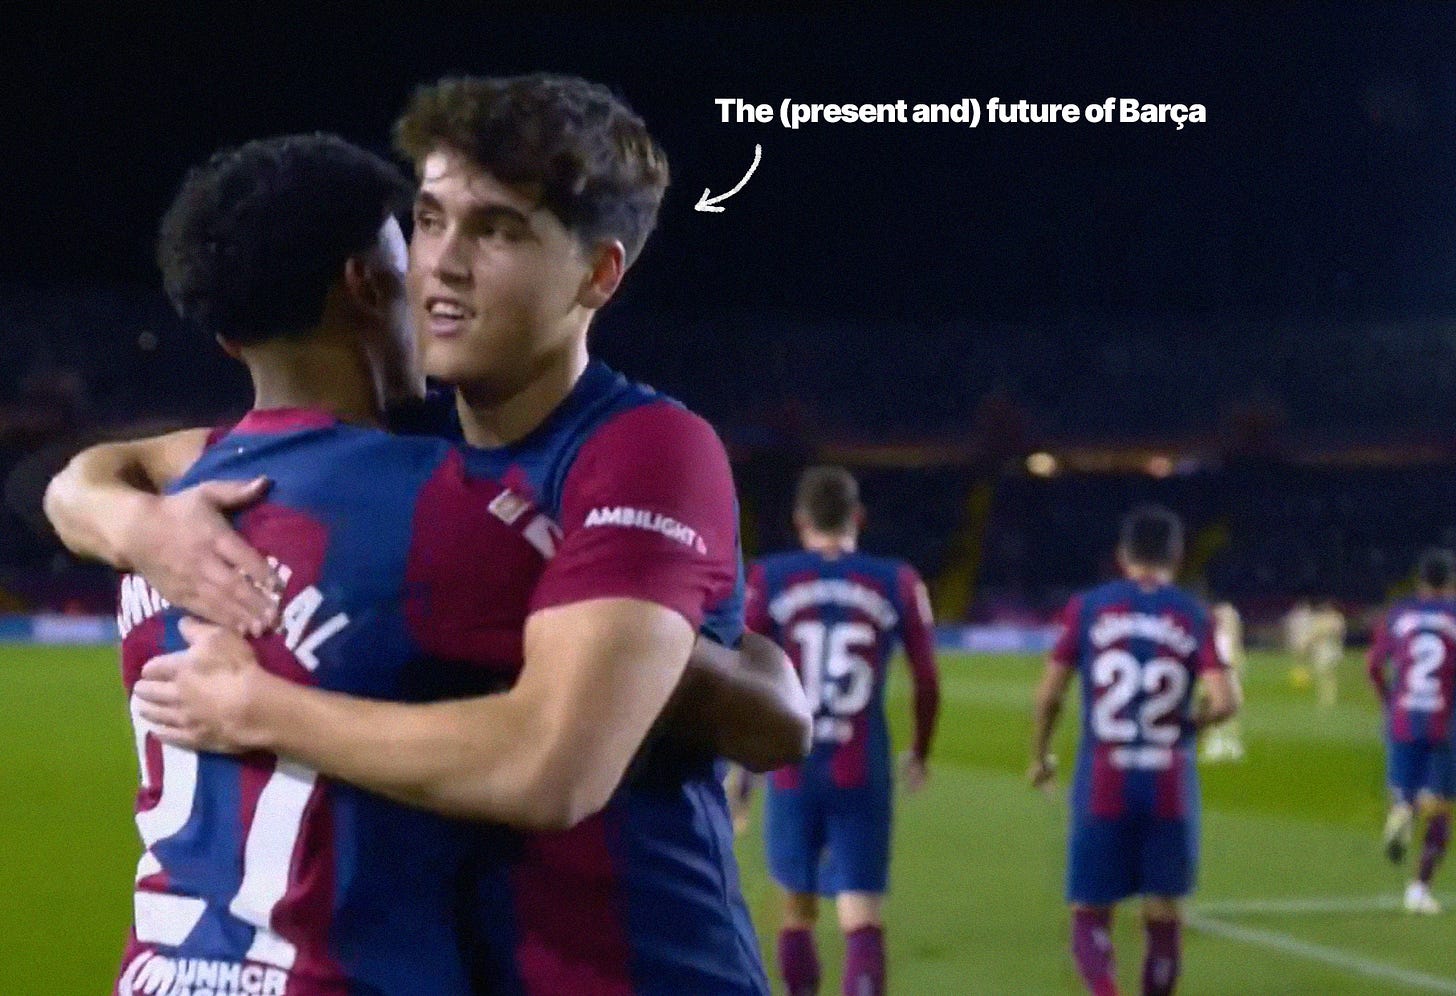 A screenshot of Pau Cubarsí hugging Lamine Yamal with Barcelona players in the background.